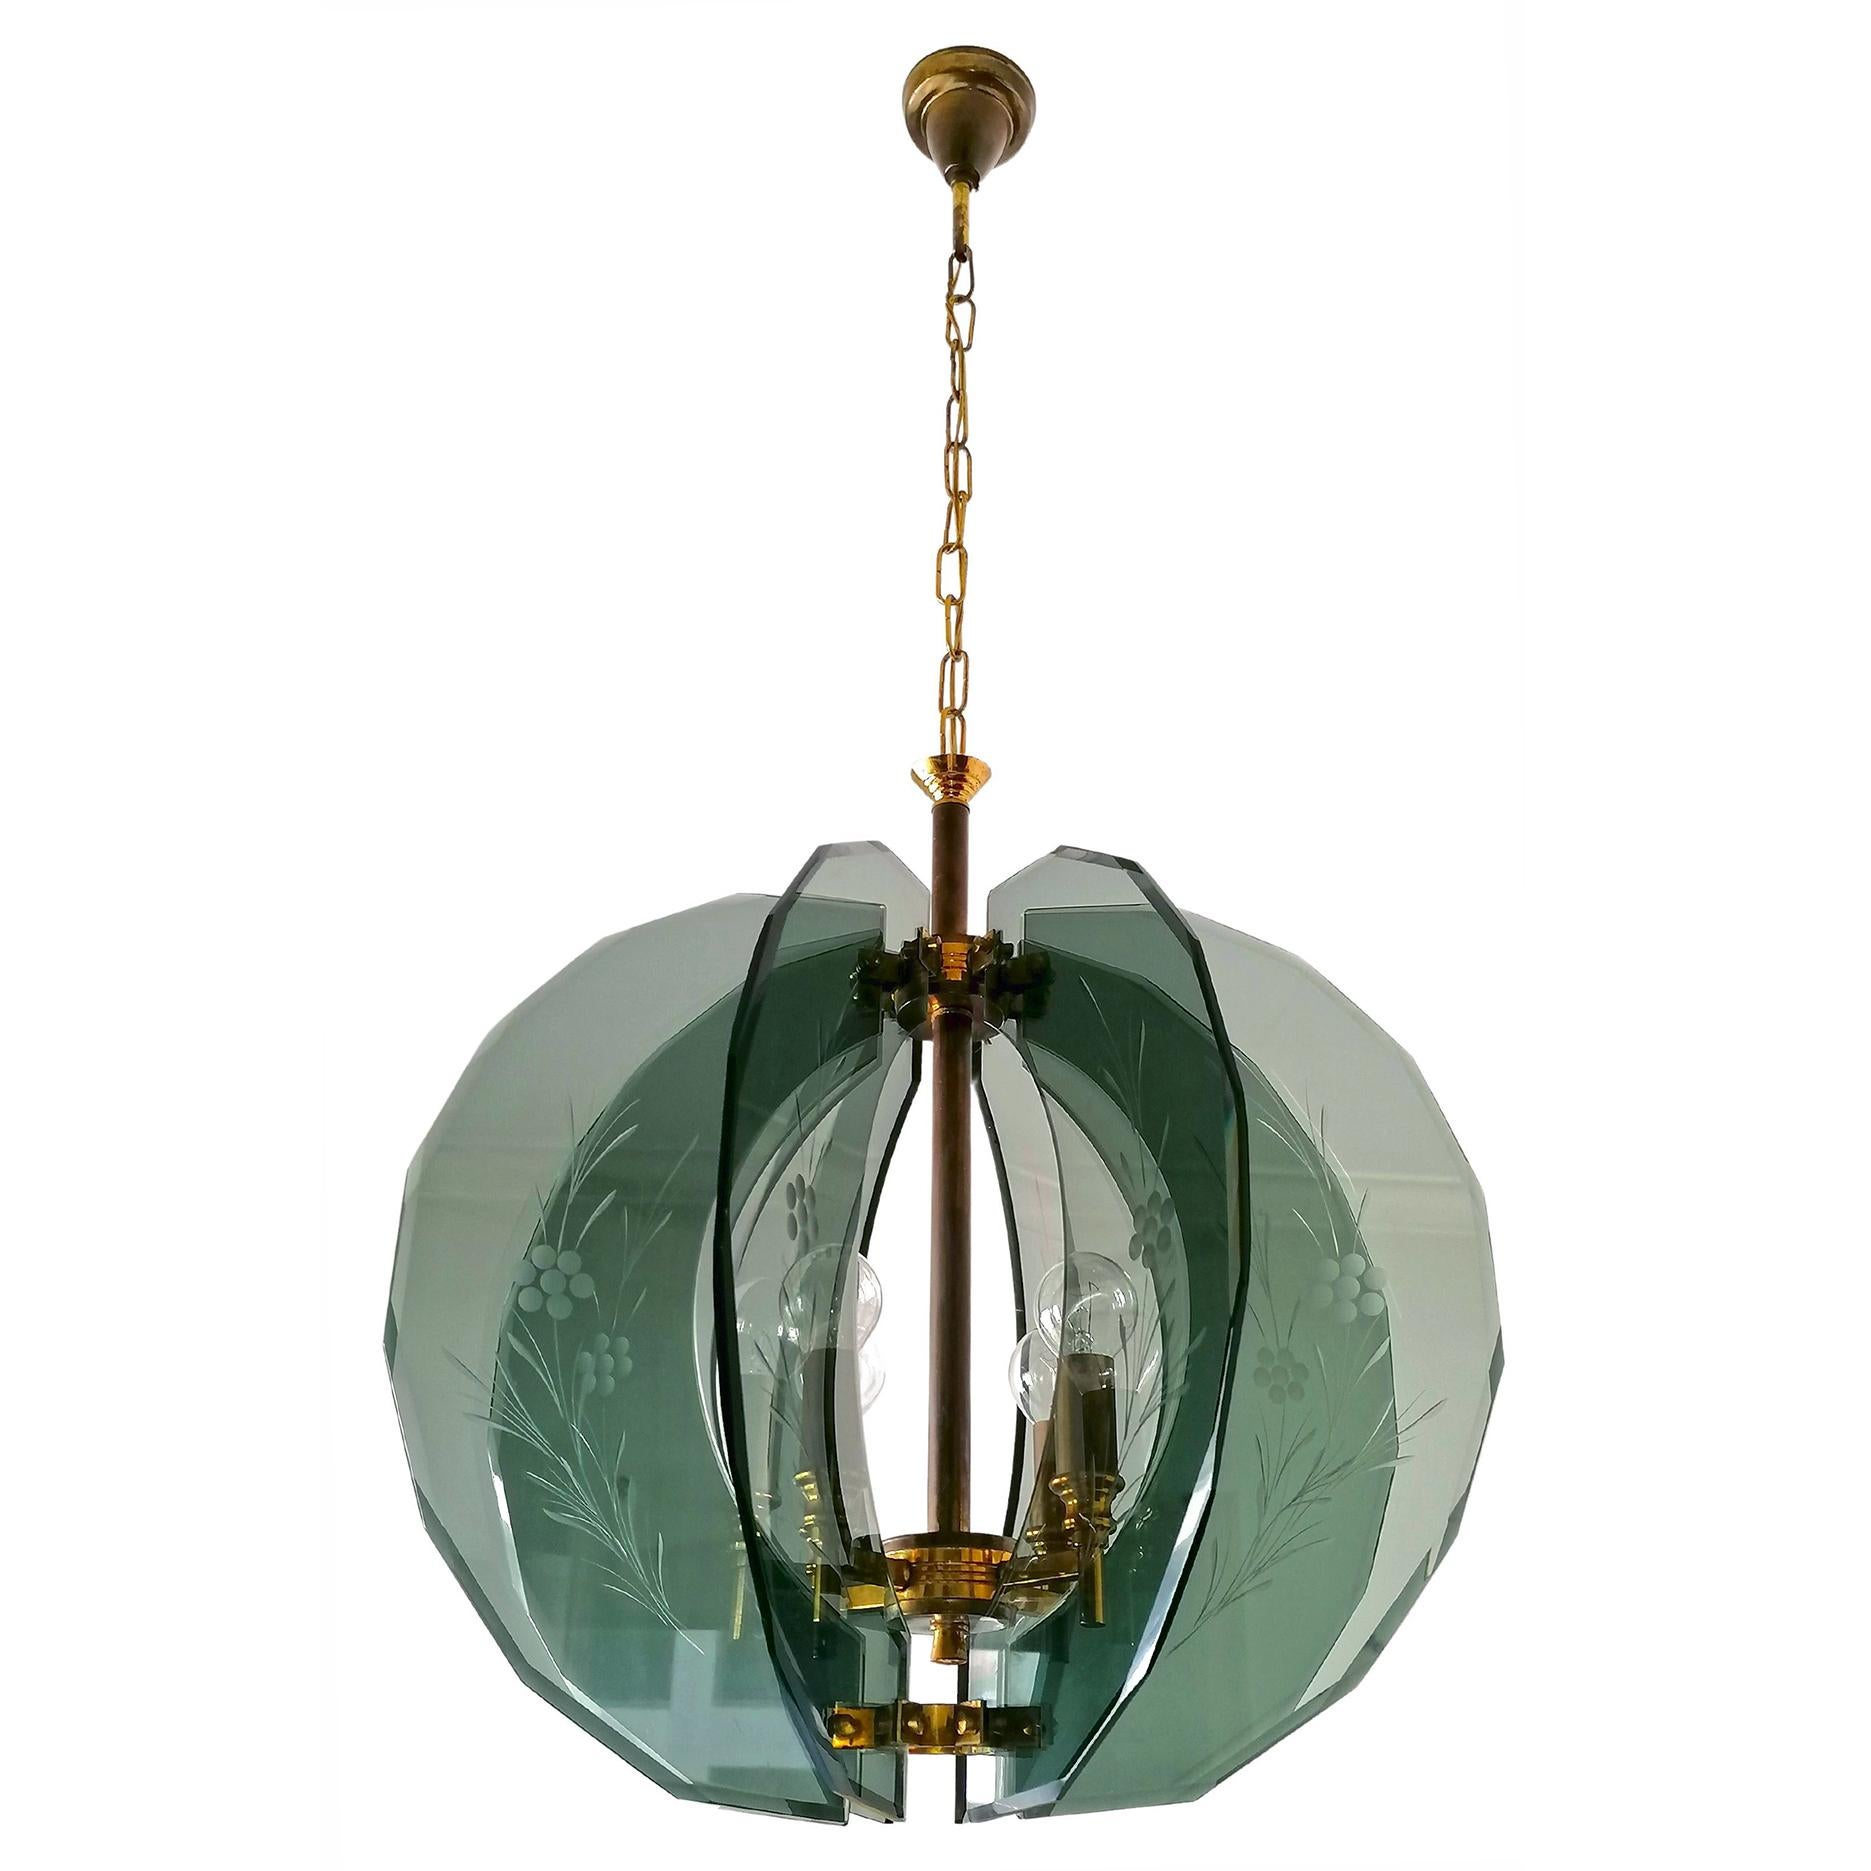 Vintage Gino Paroldo Chandelier with Brass and Smoked Hand Cut Glass, 1950s In Good Condition For Sale In Coimbra, PT